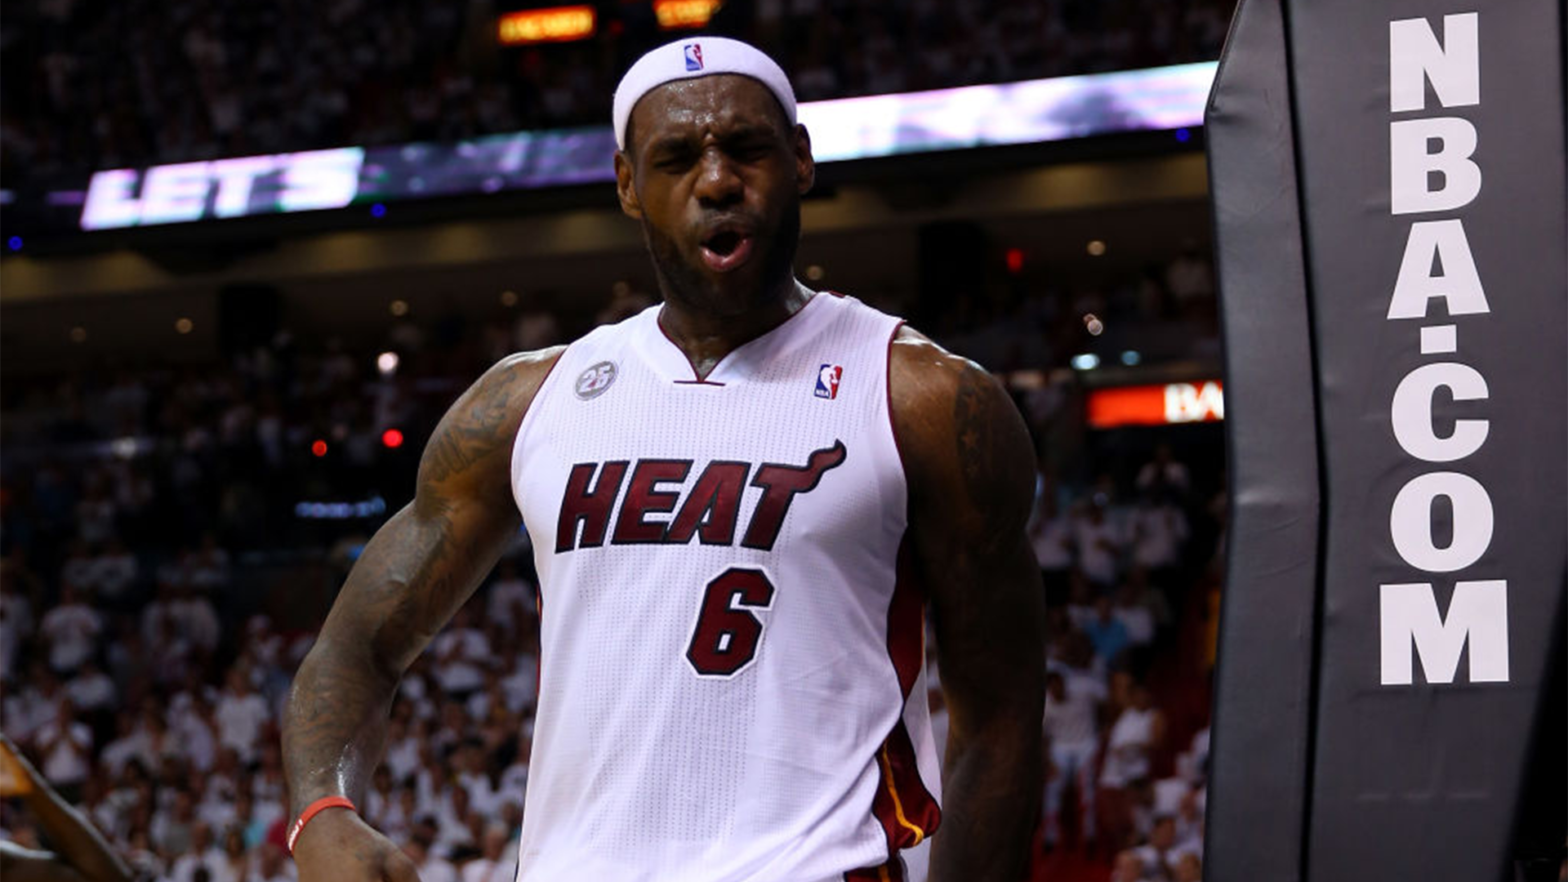 LeBron James' 2013 Finals Miami Heat Jersey Sells For A Record-Breaking $3.7M